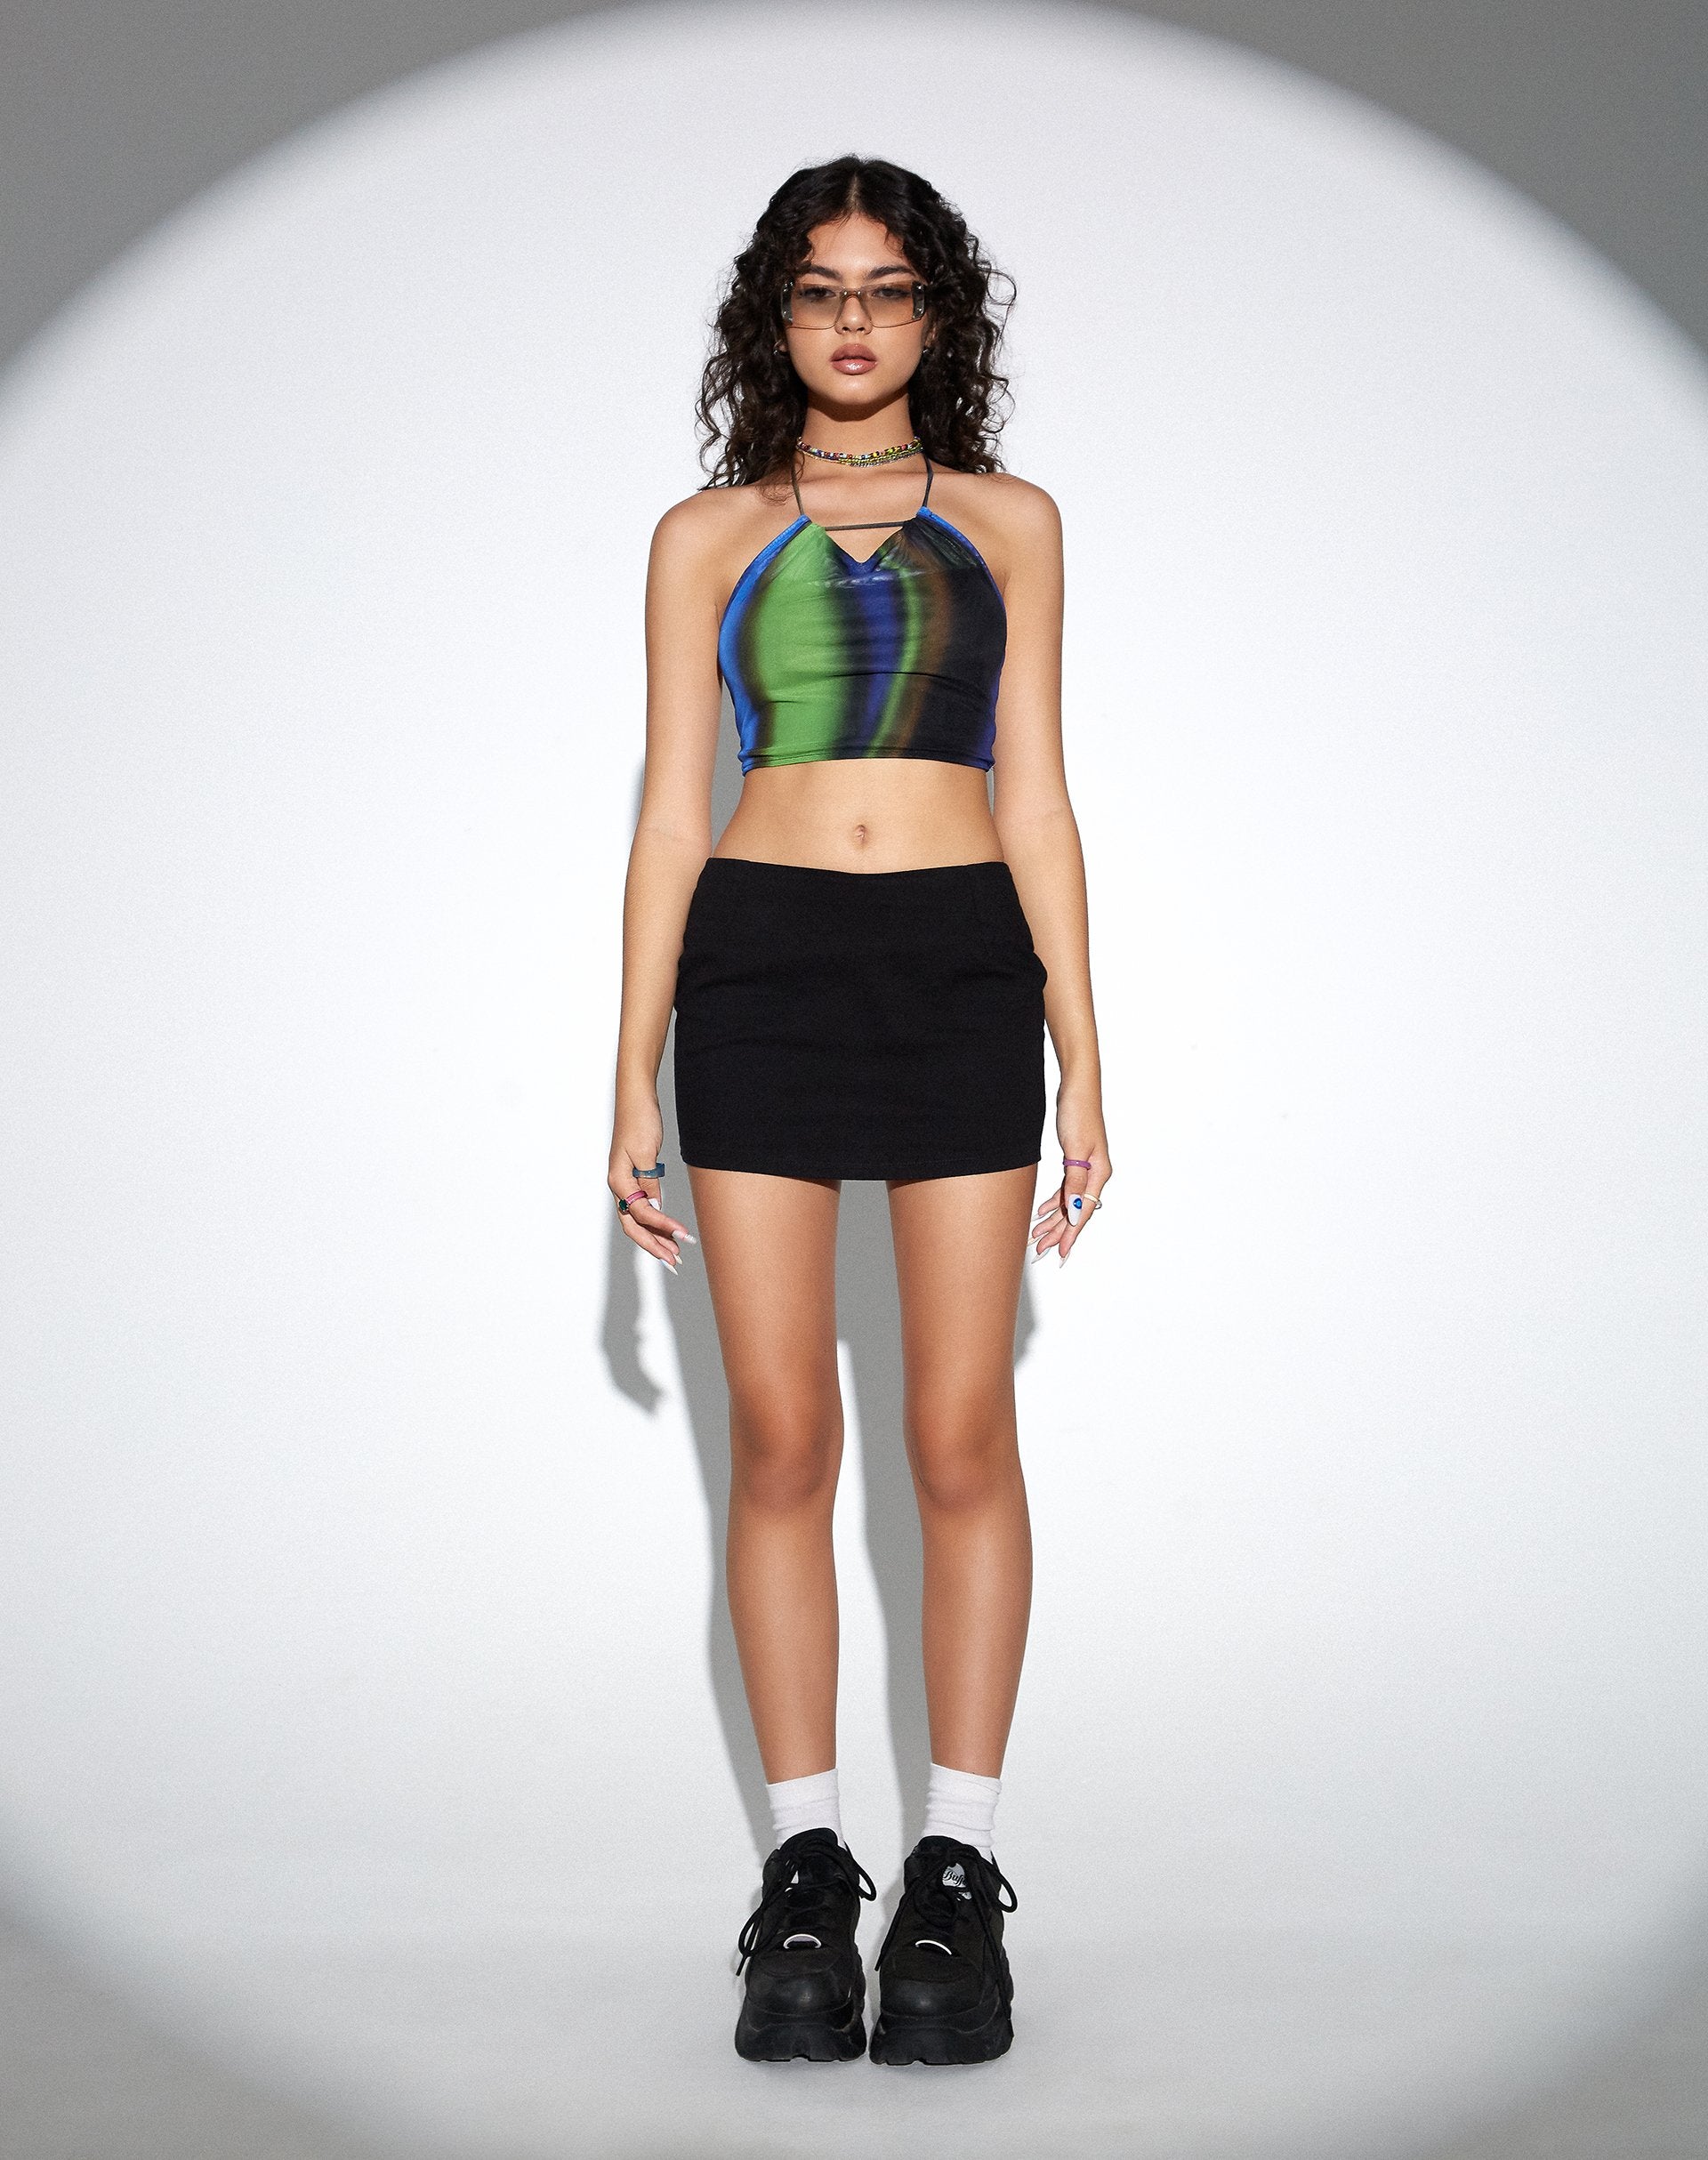 Image of MOTEL X OLIVIA NEILL Salet Crop Top in Solarized Green and Blue